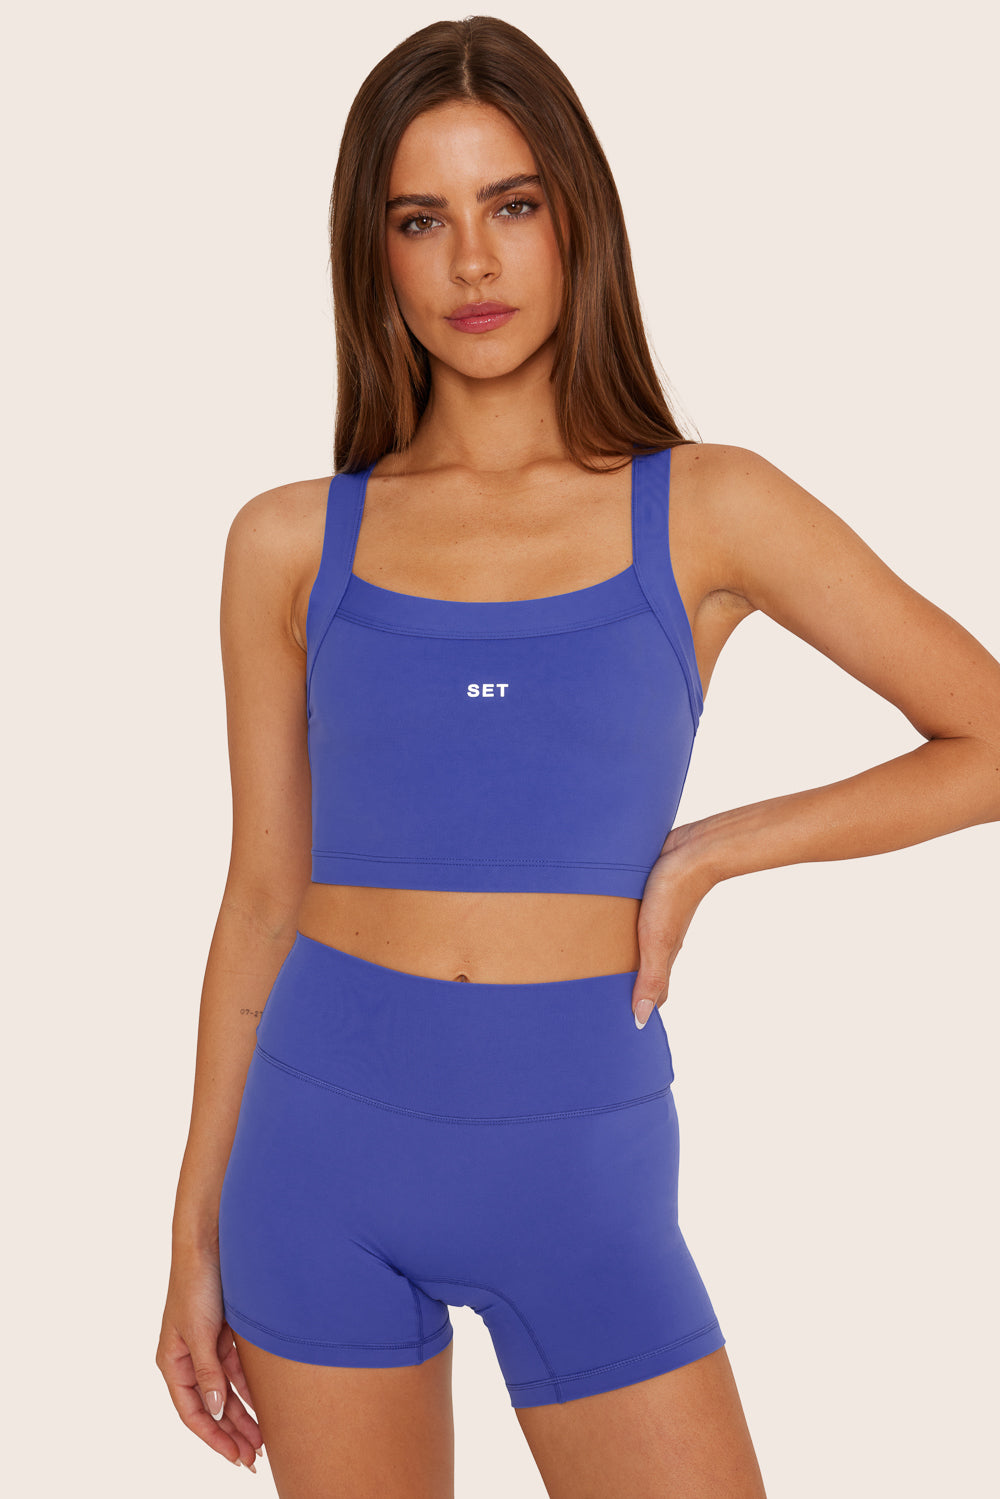 SPORTBODY® CAMI CROP - JETSETTER Featured Image